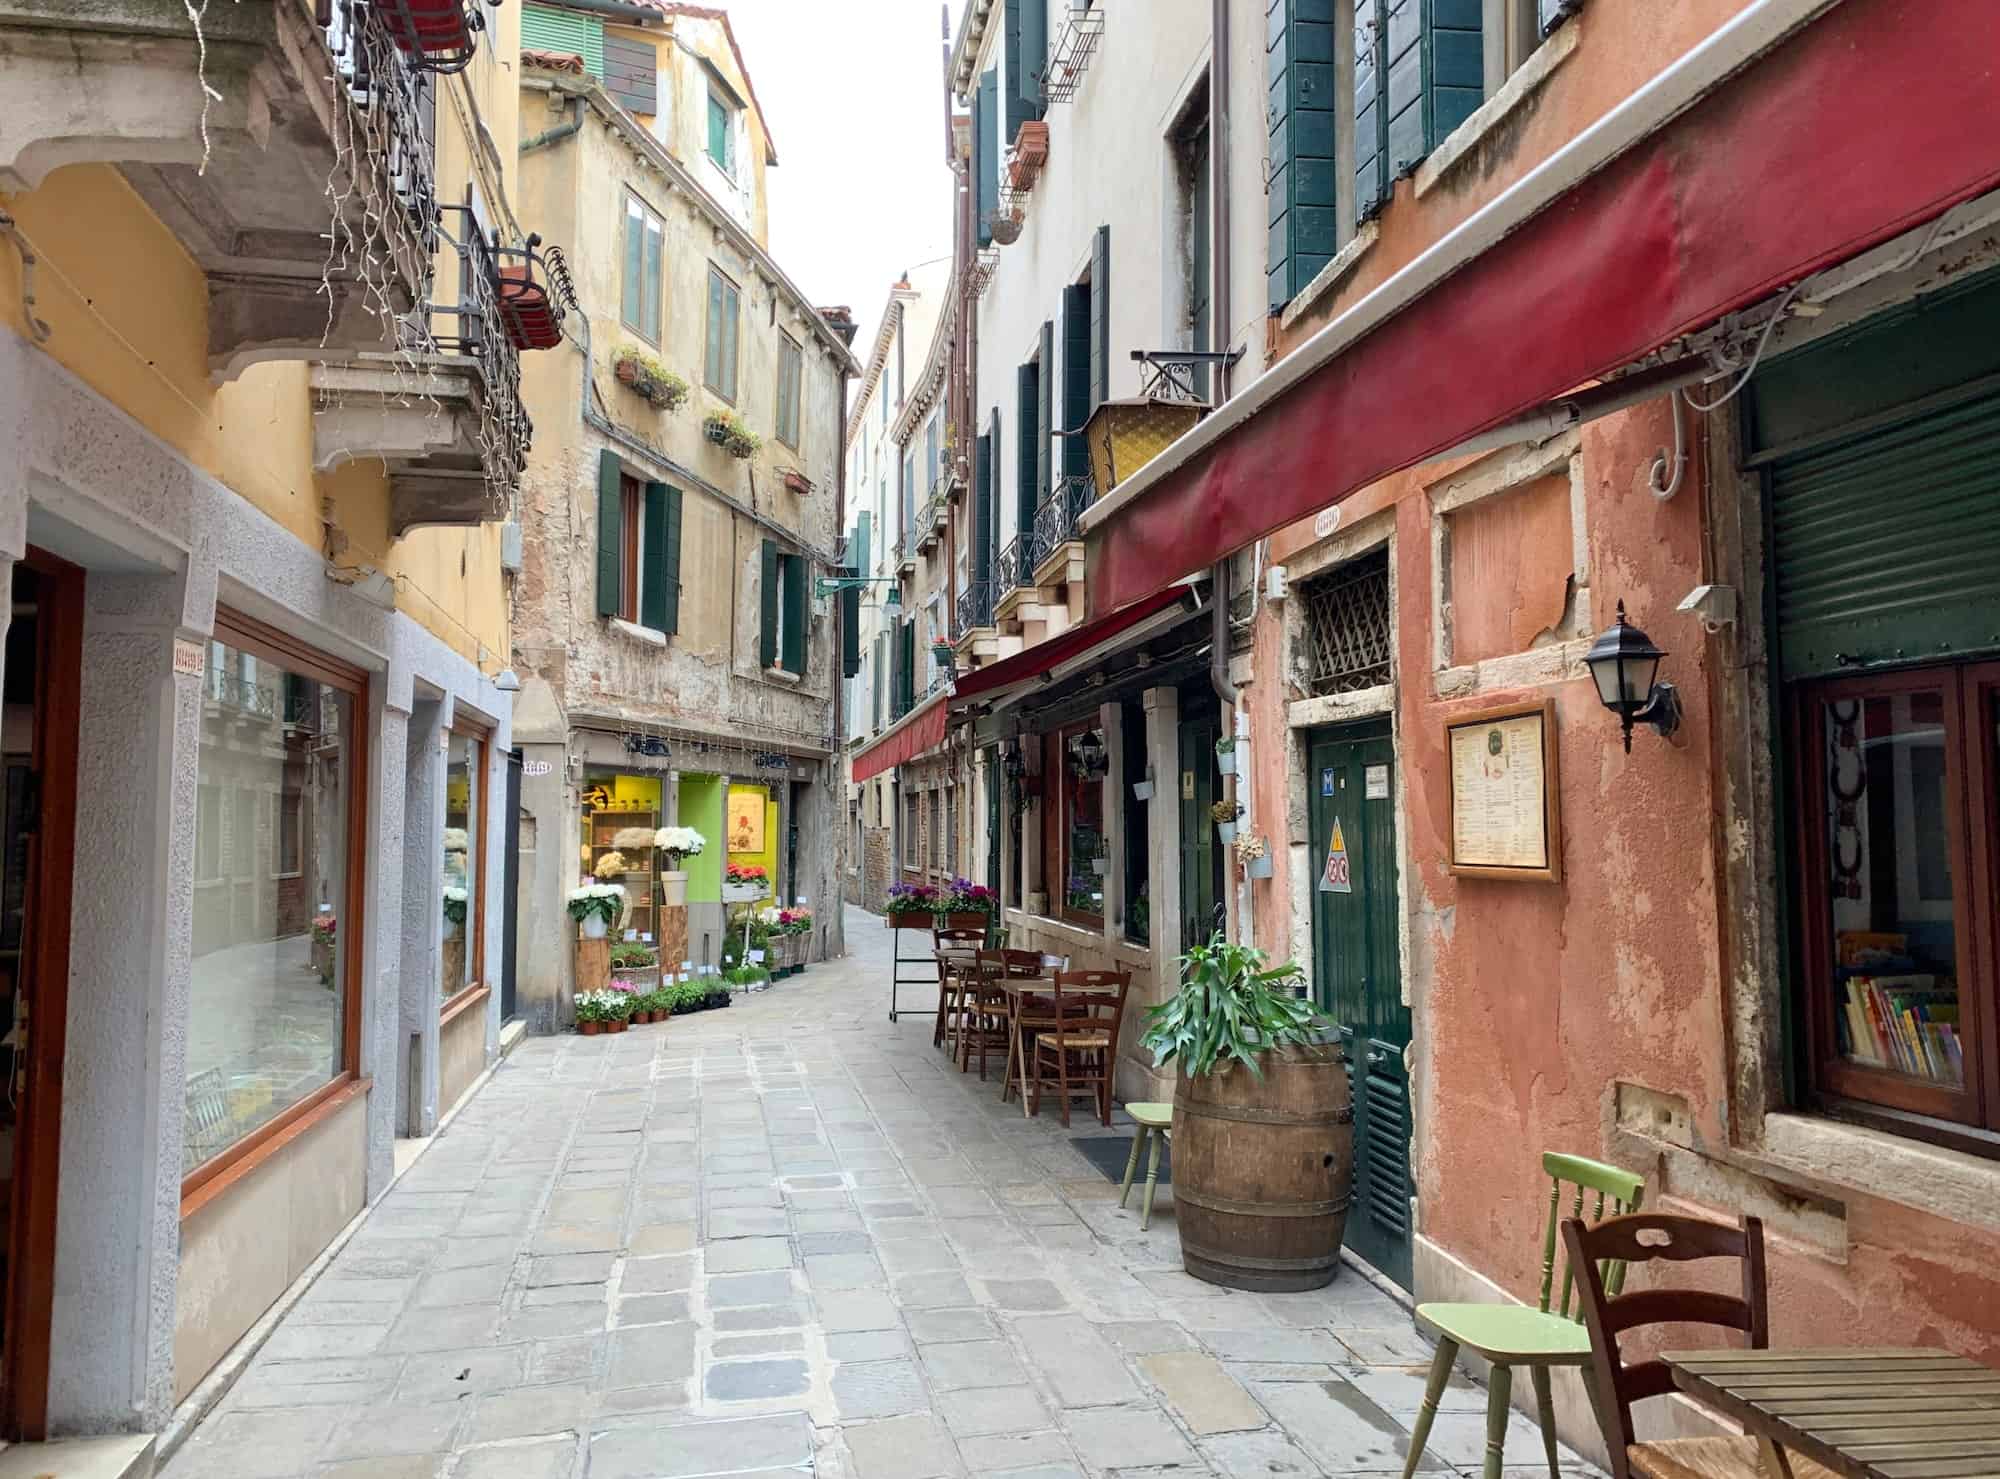 Picturesque alley way and pedestrian street of venice with a flower stores and restaurants